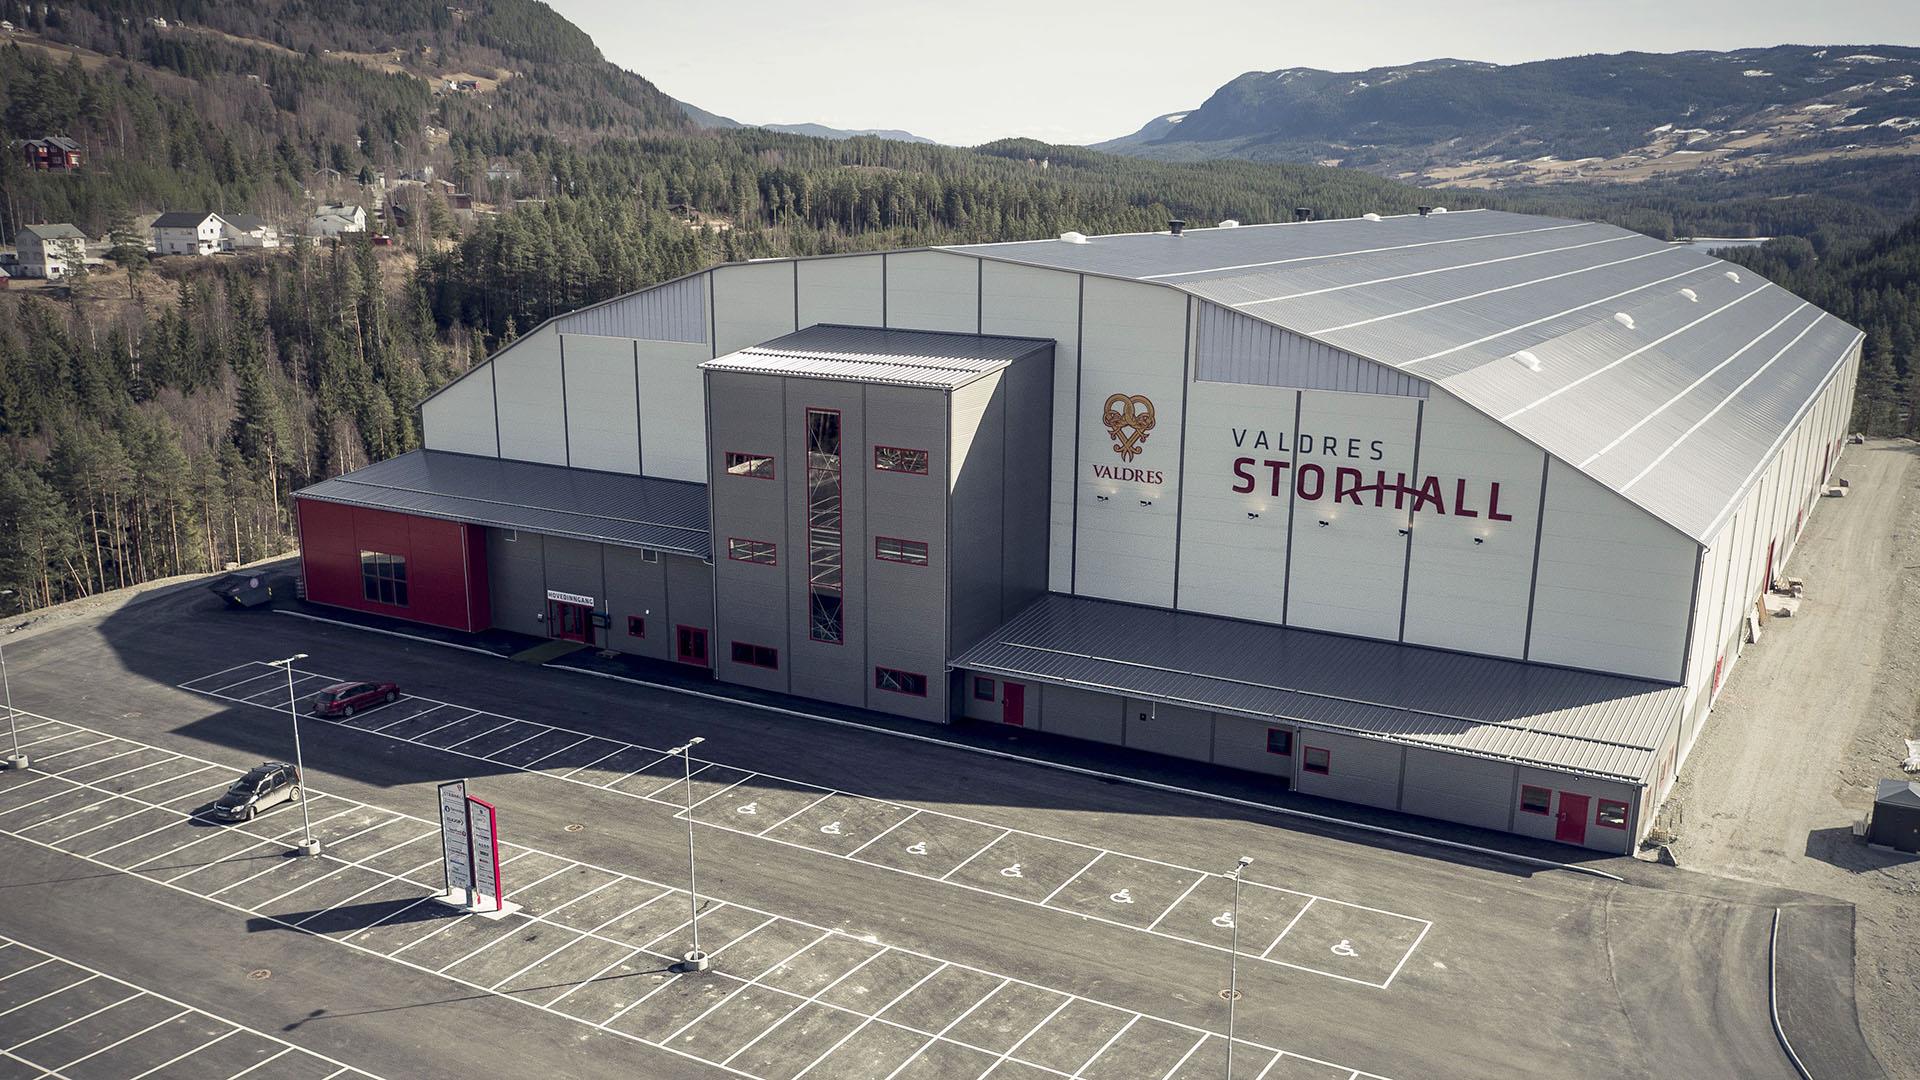 A multi-use hall for indoor activities with tha parking lot, seen from outside. The image is taken from low hight with a drone.